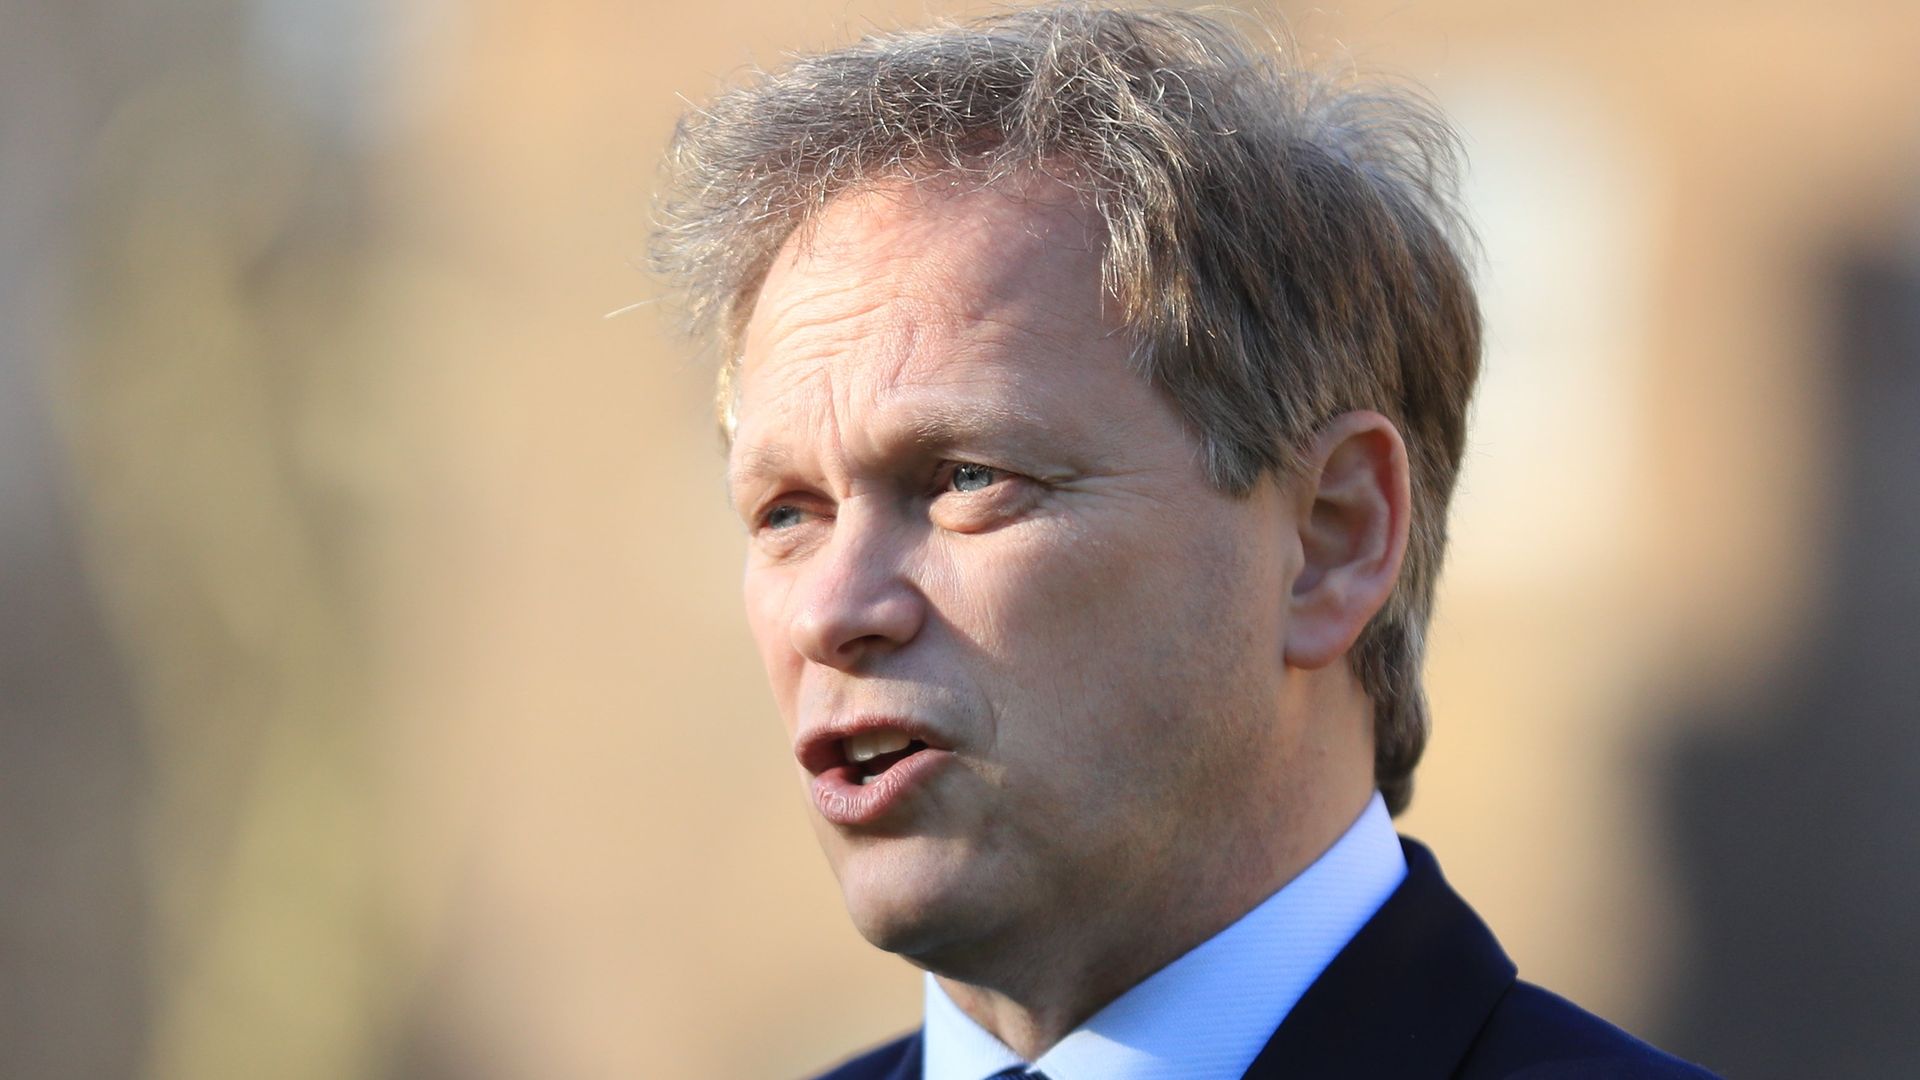 Transport secretary Grant Shapps speaking to the media on College Green - Credit: PA